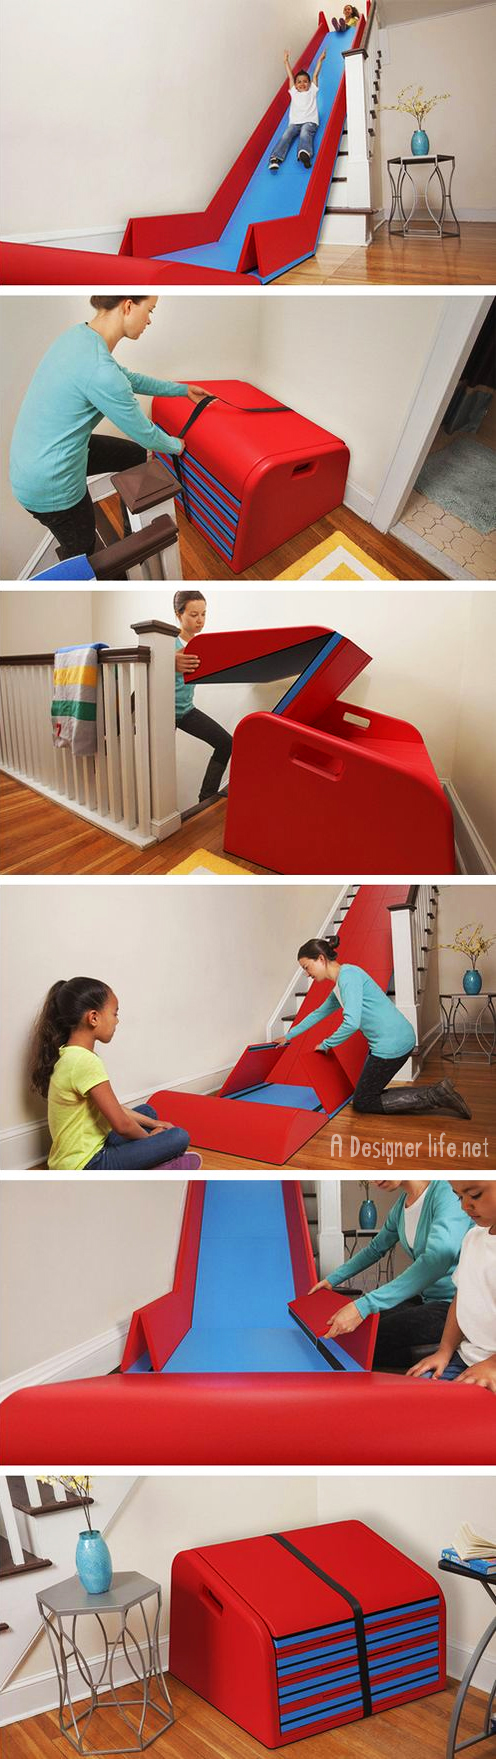 Awesome Products: A stair slide that converts your staircase into a slippery dip